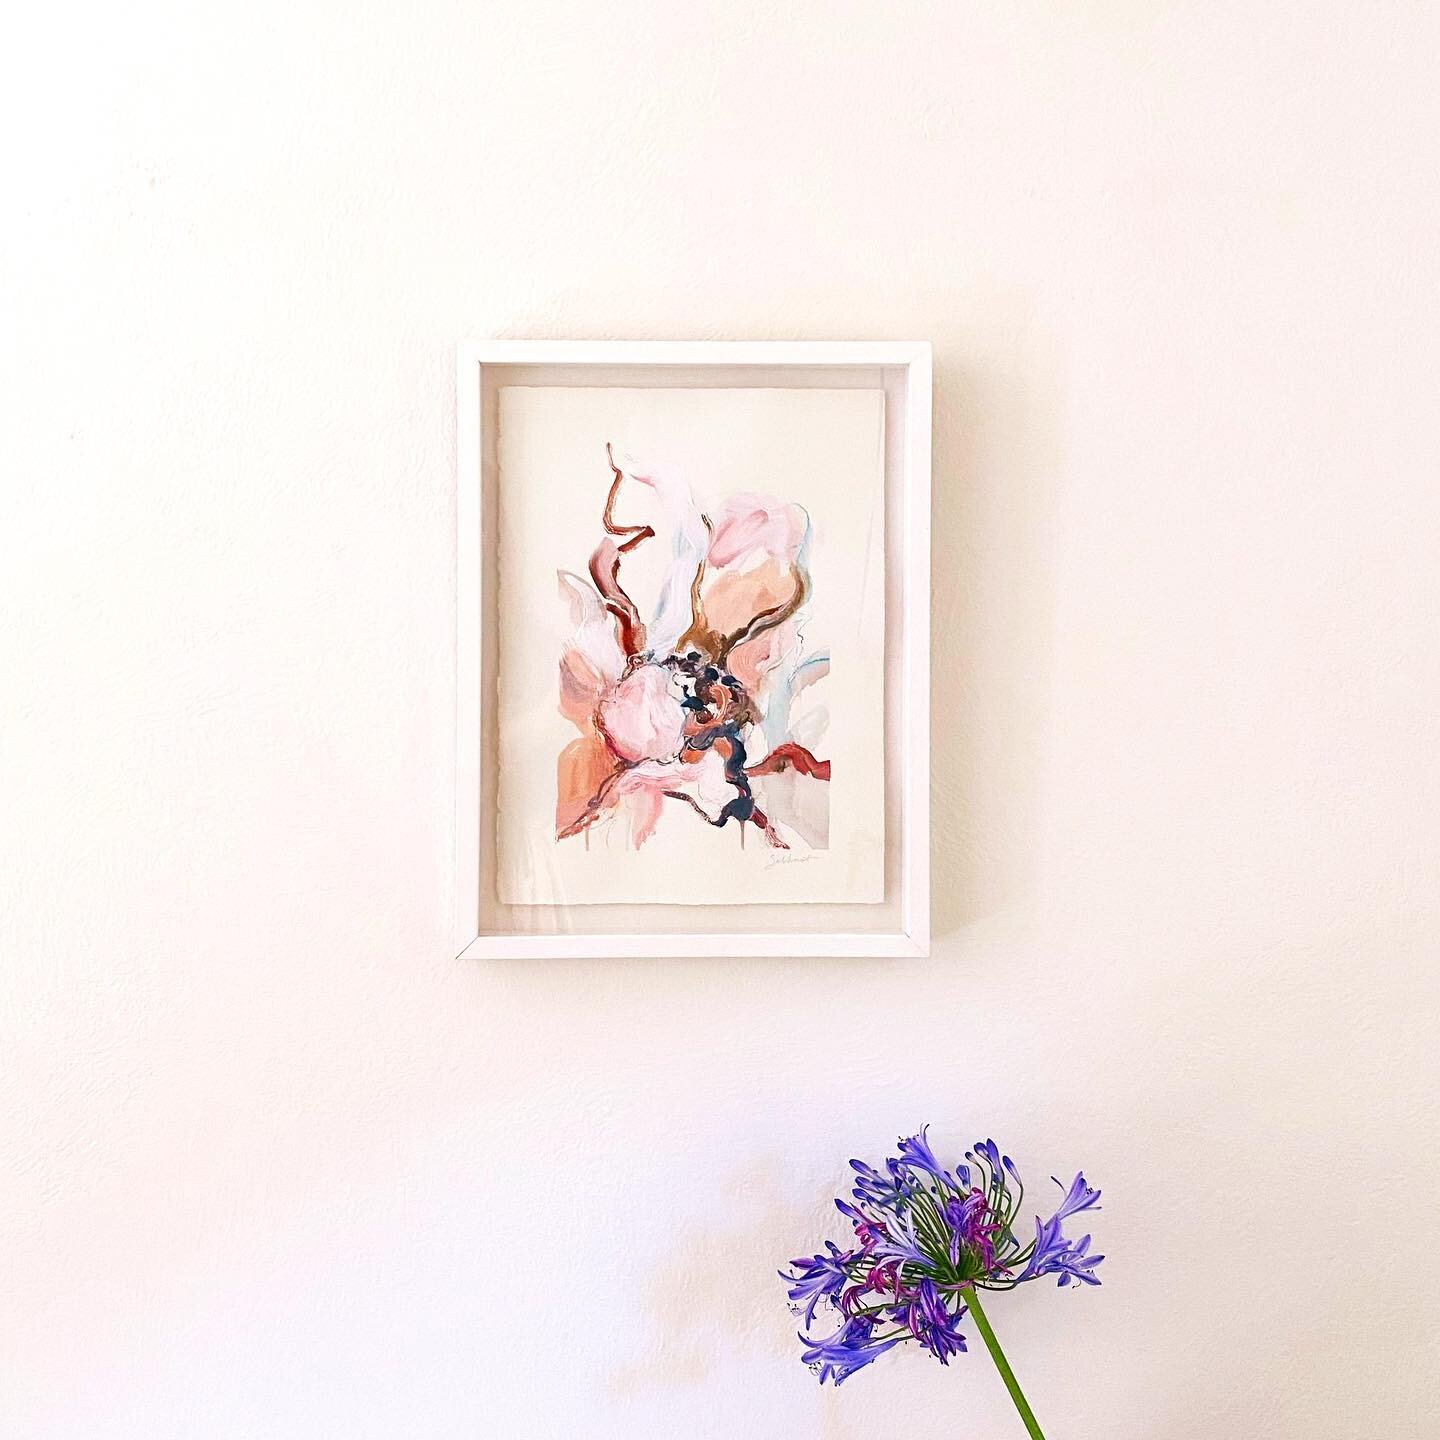 One of my favorite pieces currently up @talismanwine ⁣
⁣
A true floral abstract, almost so abstract you could miss the floral, but I love it that way. This collection - #ConversationsWithQuietude - has been so popular, and she is one of the last piec